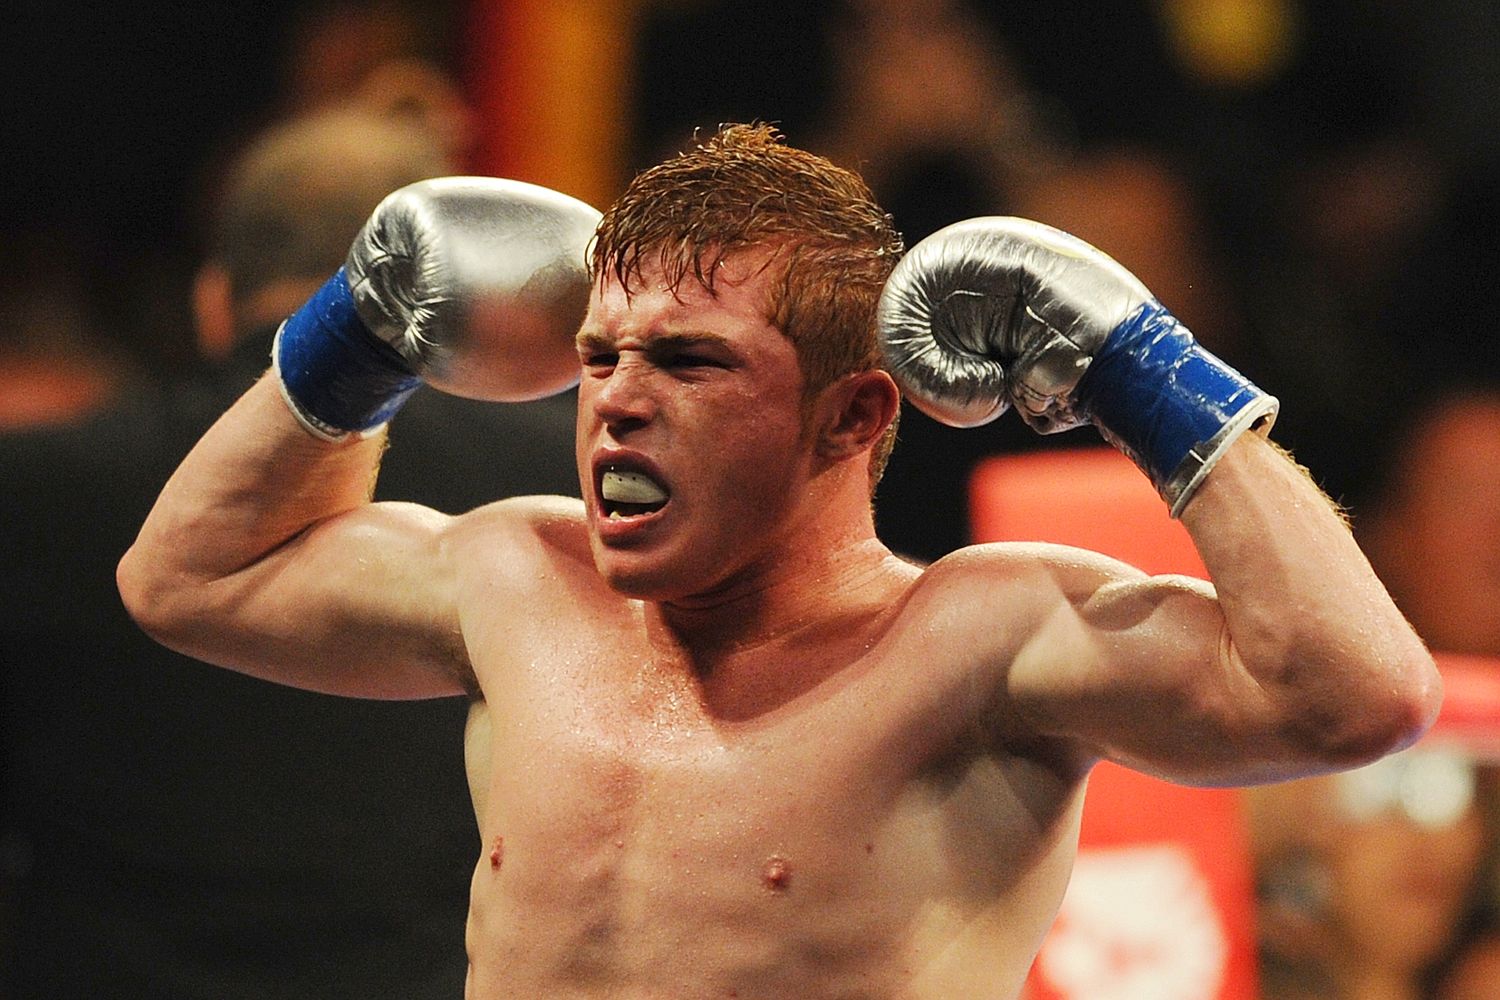 Canelo: “This fight can be one of the best in history”